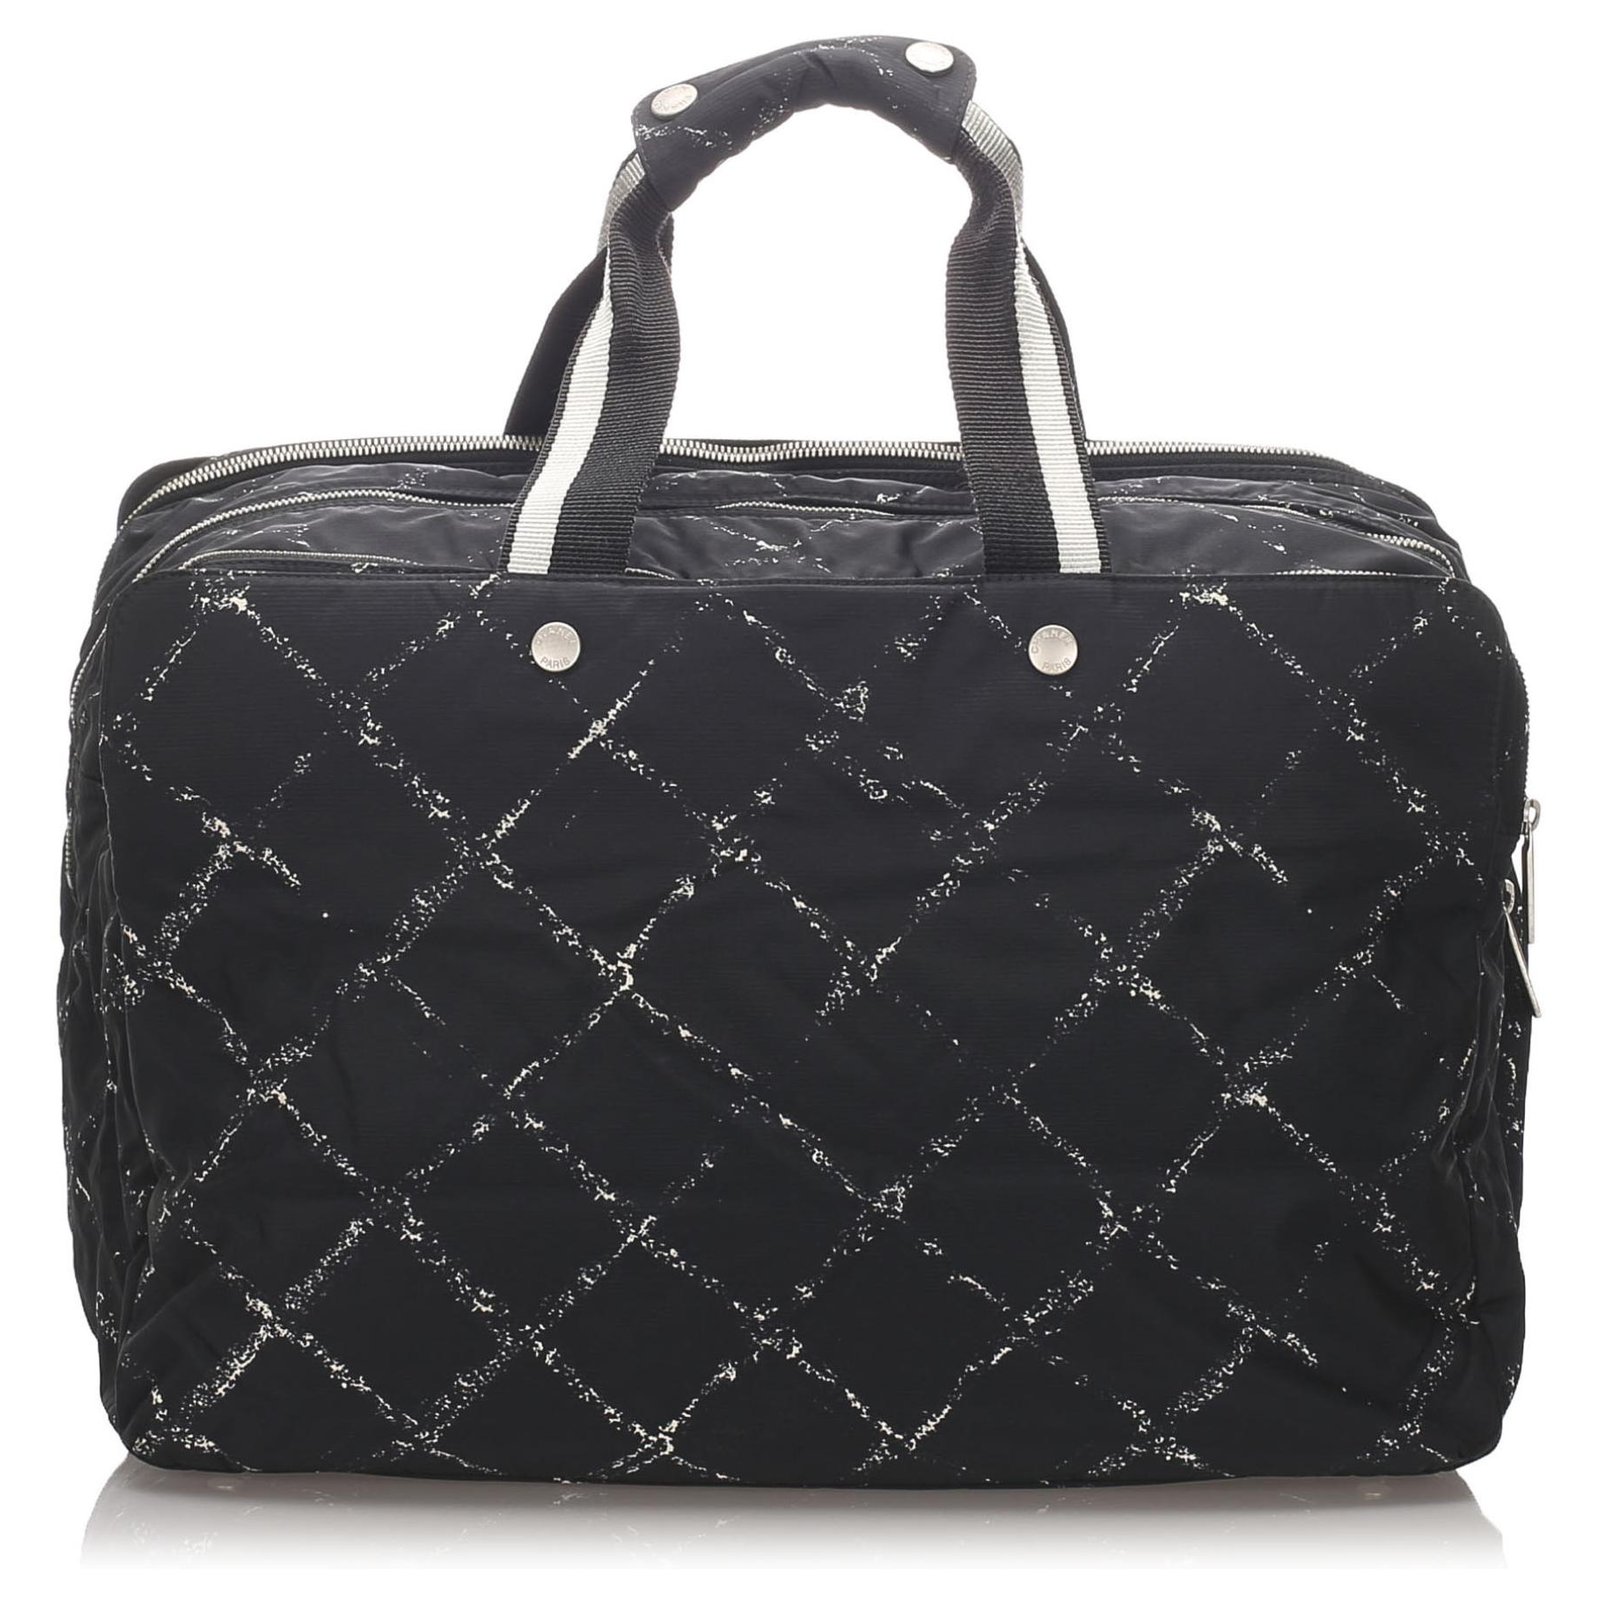 CHANEL Vinyl Calfskin Quilted Trolley Rolling Luggage Black 727347